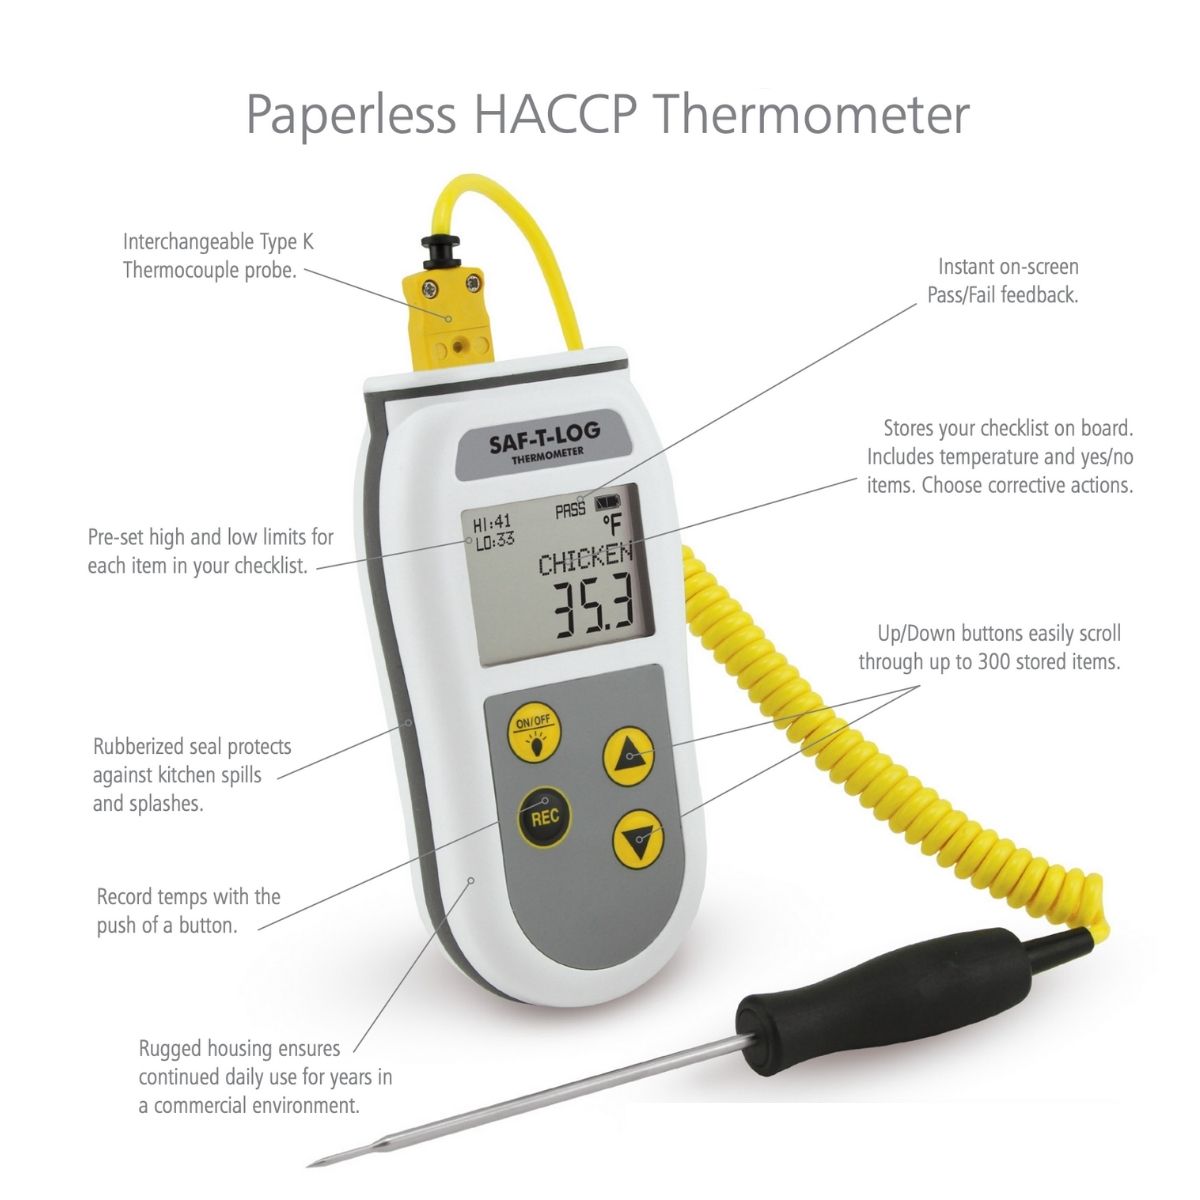 Information about Paperless HACCP Thermometer Saf-T-Log